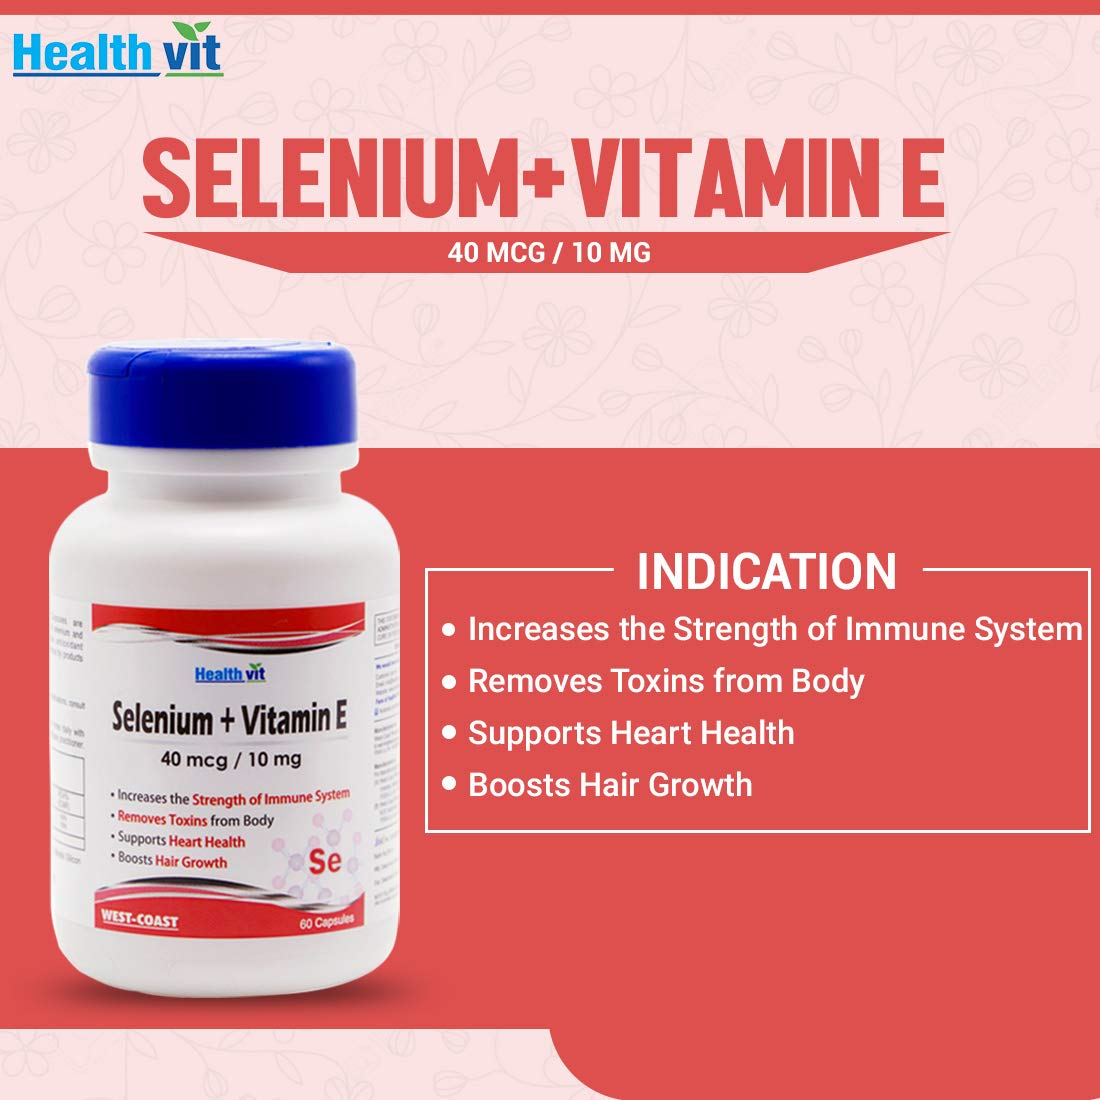 Healthvit Selenium 40mcg + Vitamin E 10mg As Powerful Antioxidant | Removes Toxins From Body | Supports Heart Health | Boosts Hair Growth |Vegan And Gluten Free | 60 Capsules